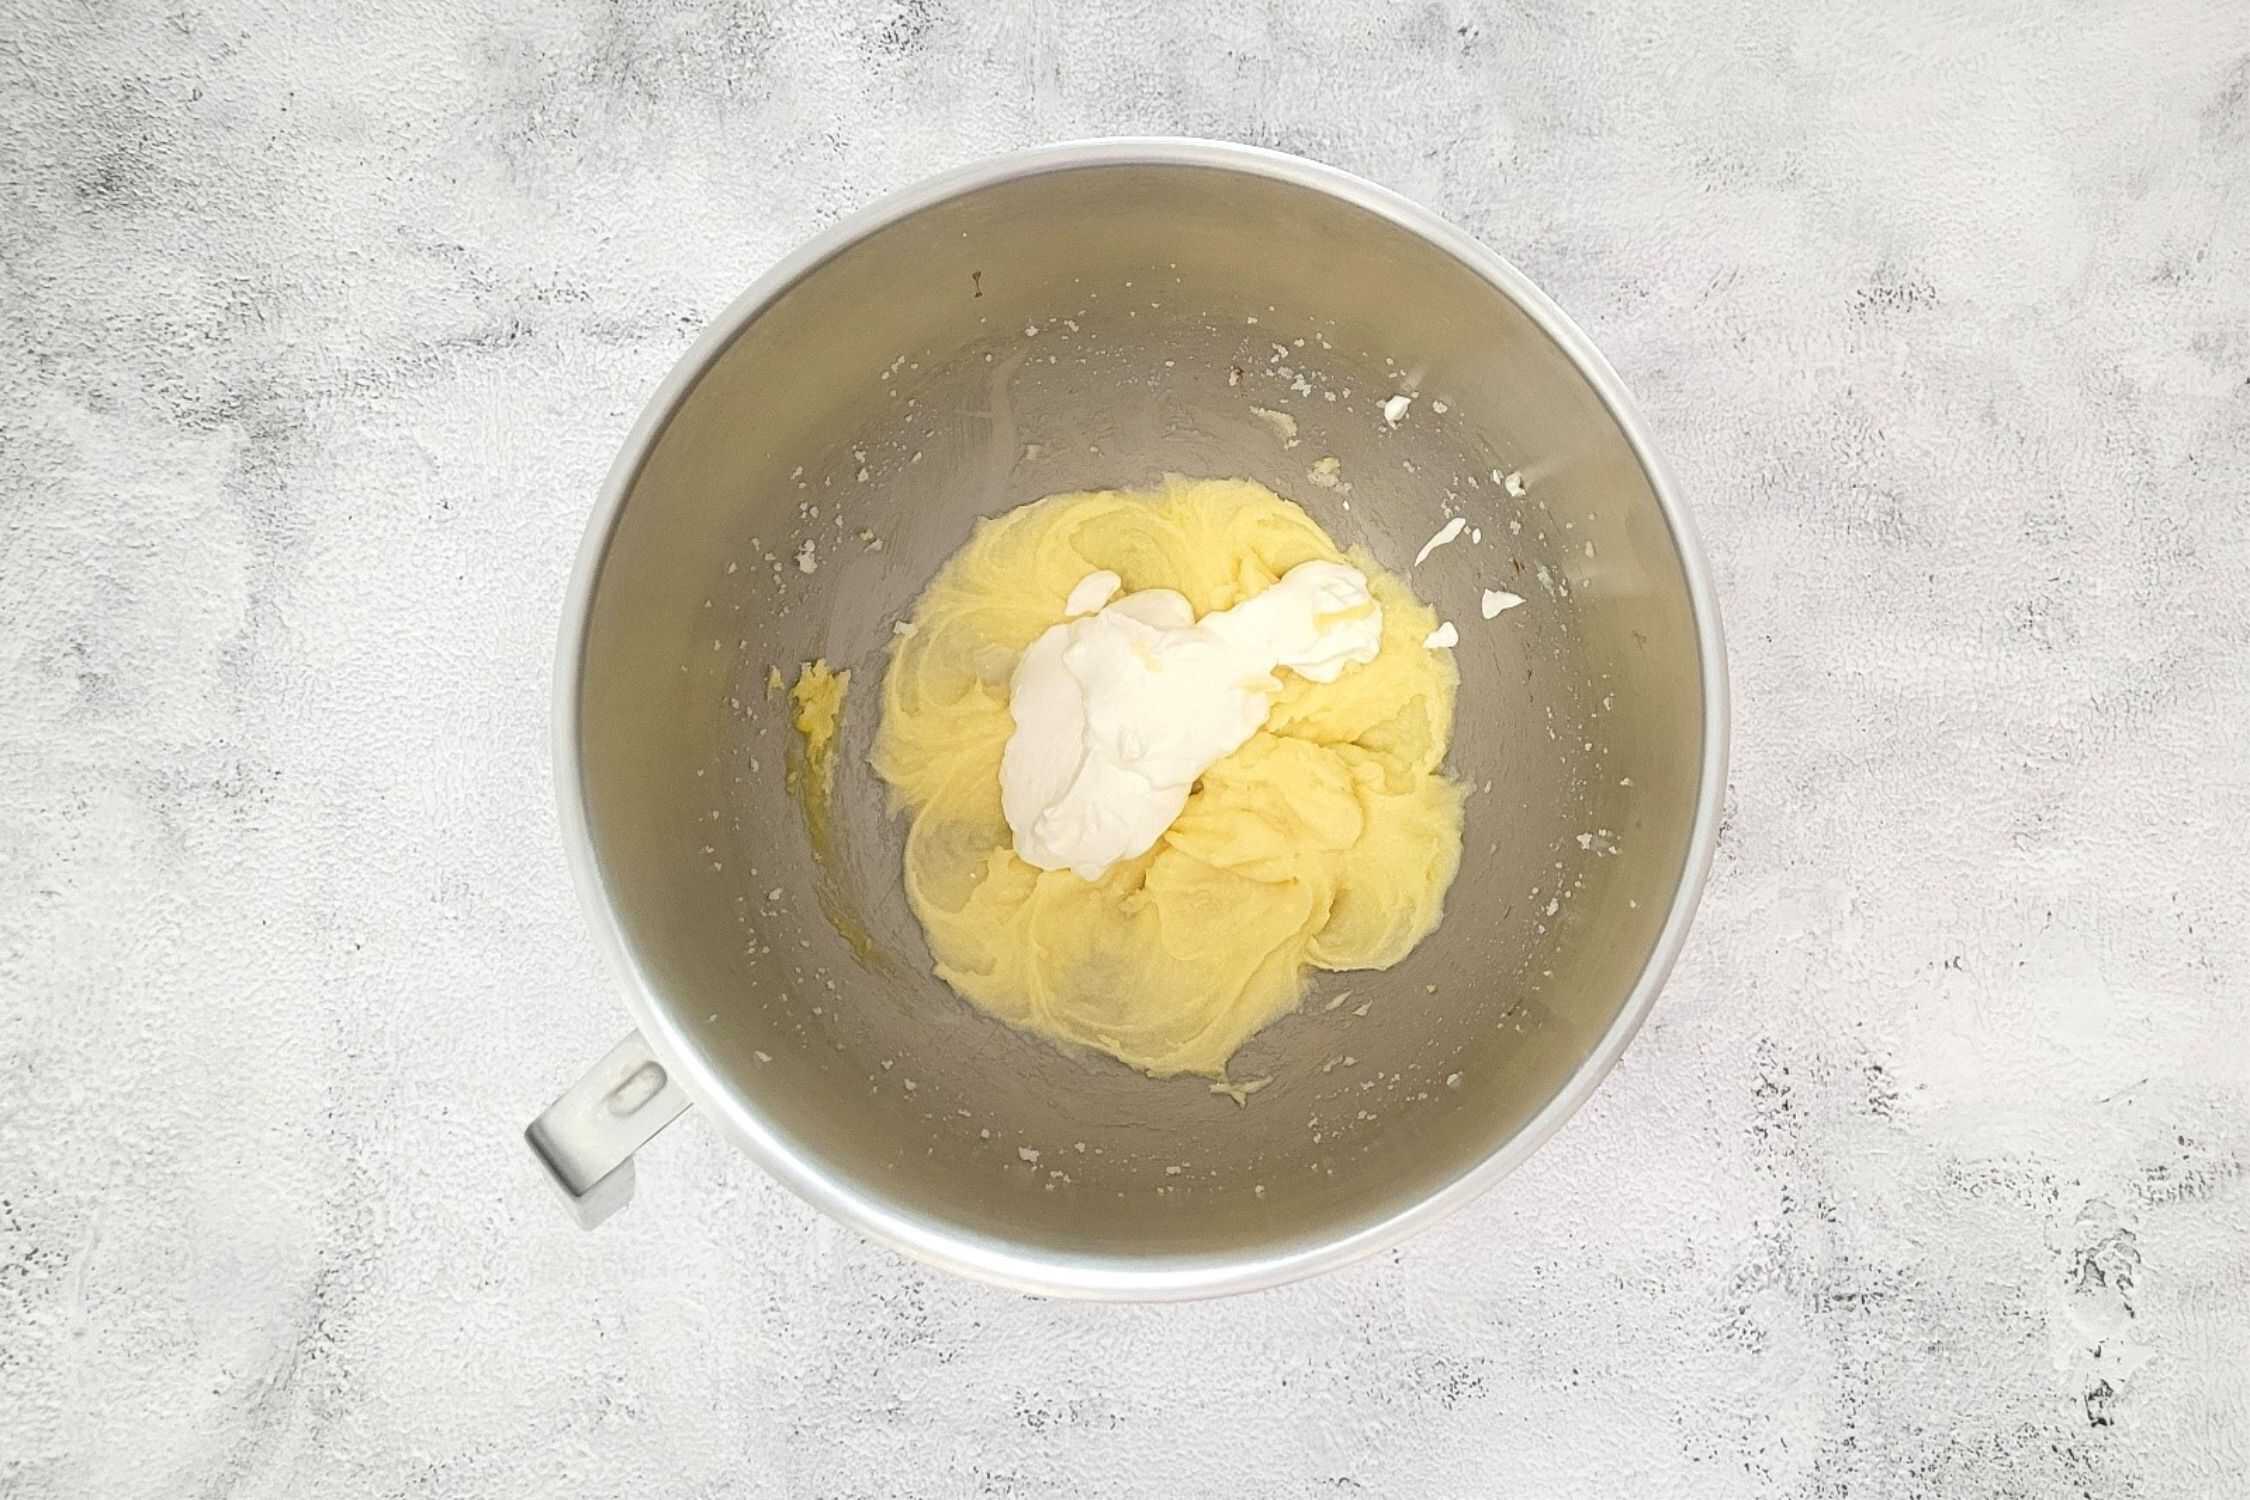 sour cream added to mixing bowl to make cookie dough